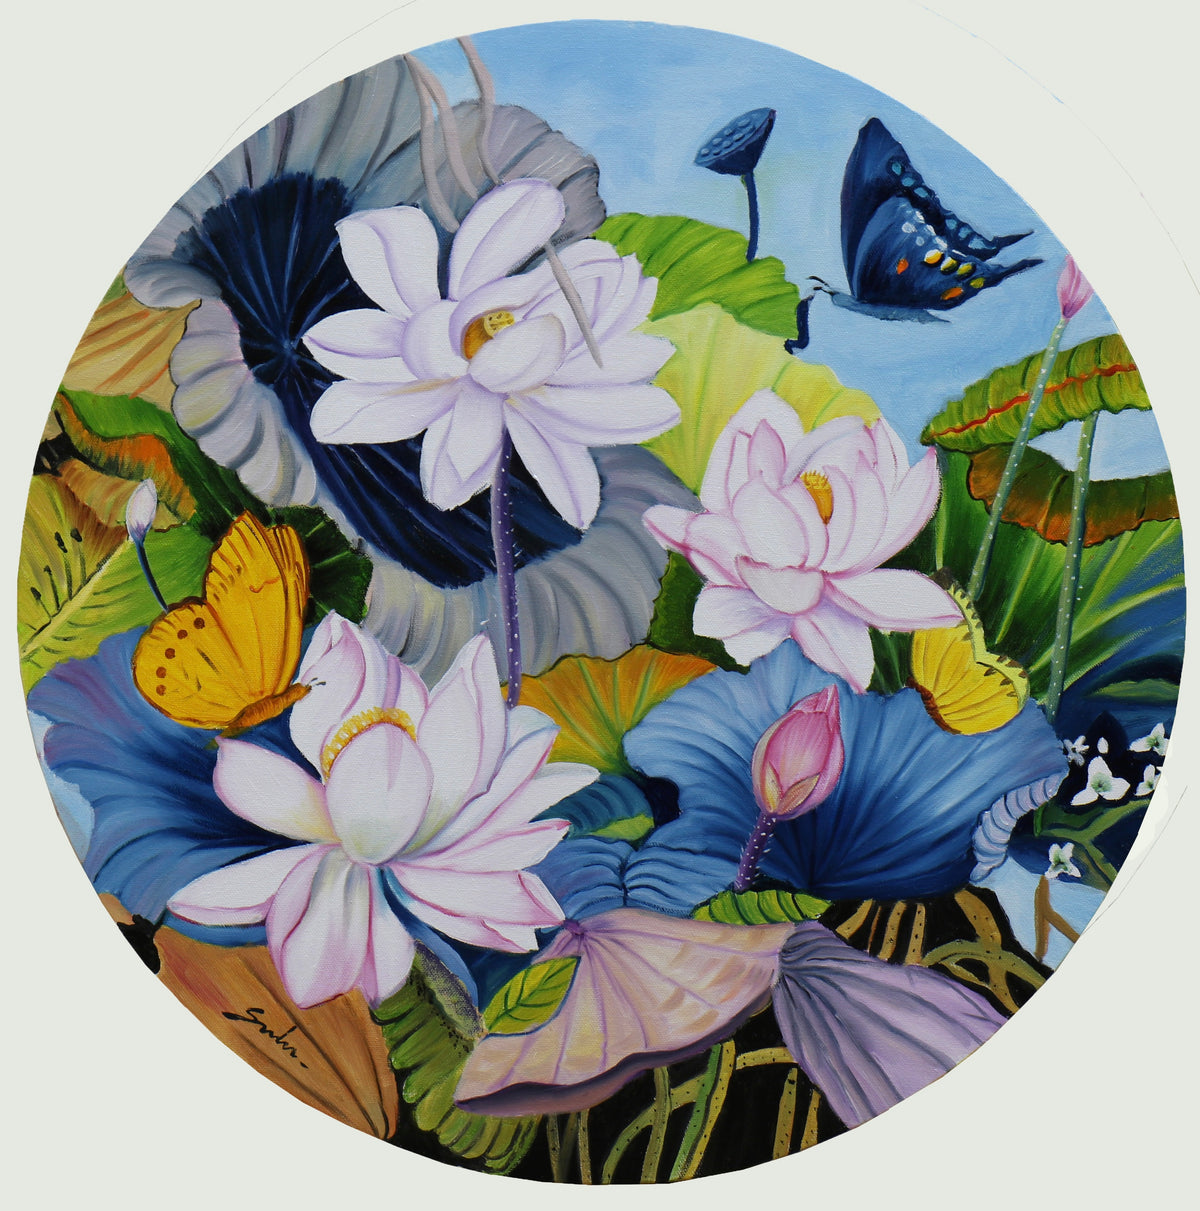 Sulakshna’s Circular artwork rich with natures blossoms and butterflies. 